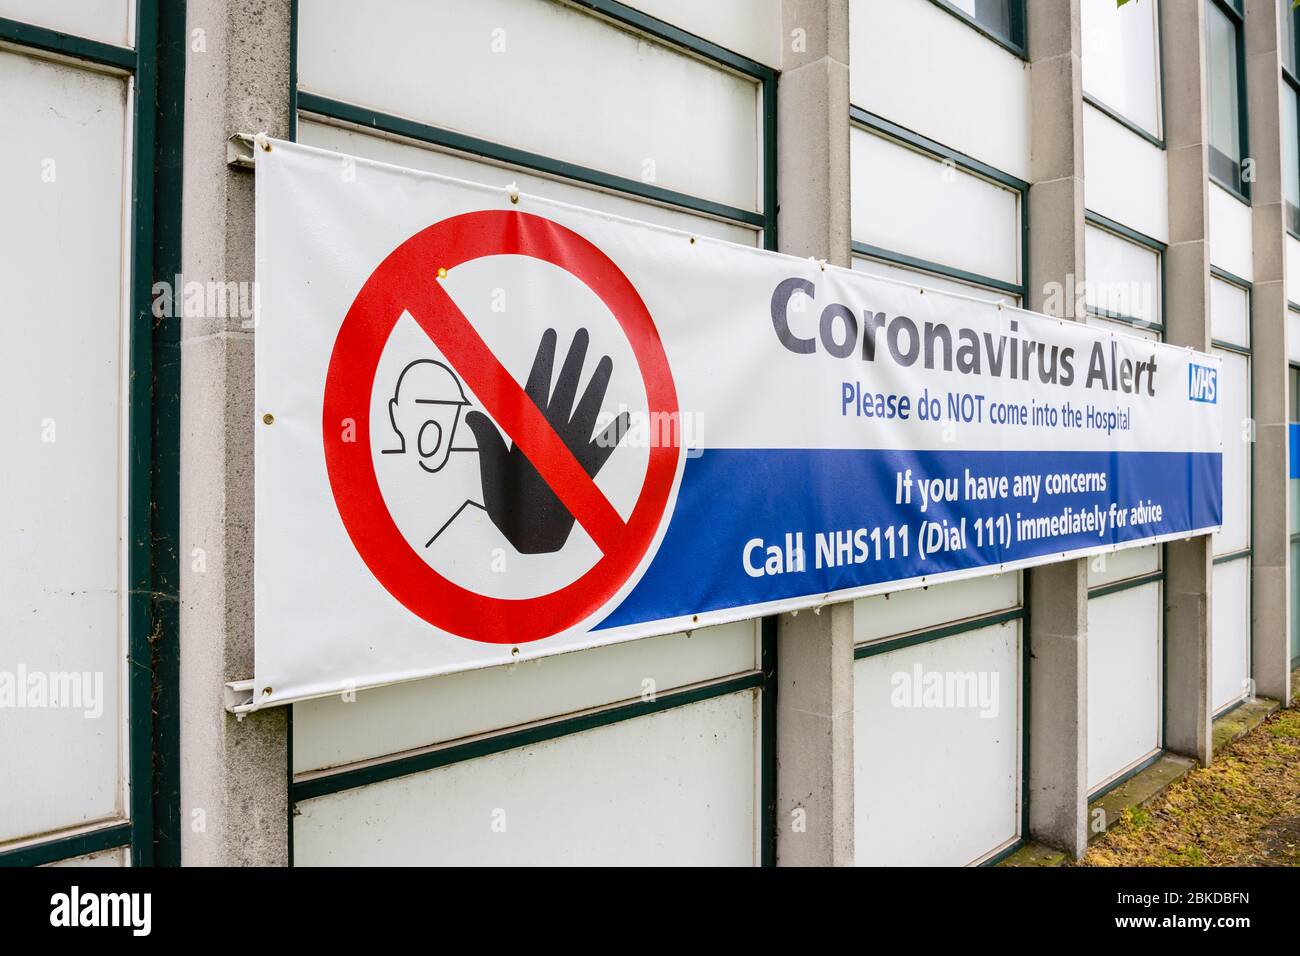 Banner sign outside Ashford hospital in Stanwell, Hounslow with a Coronavirus Alert request not to enter the hospital Stock Photo